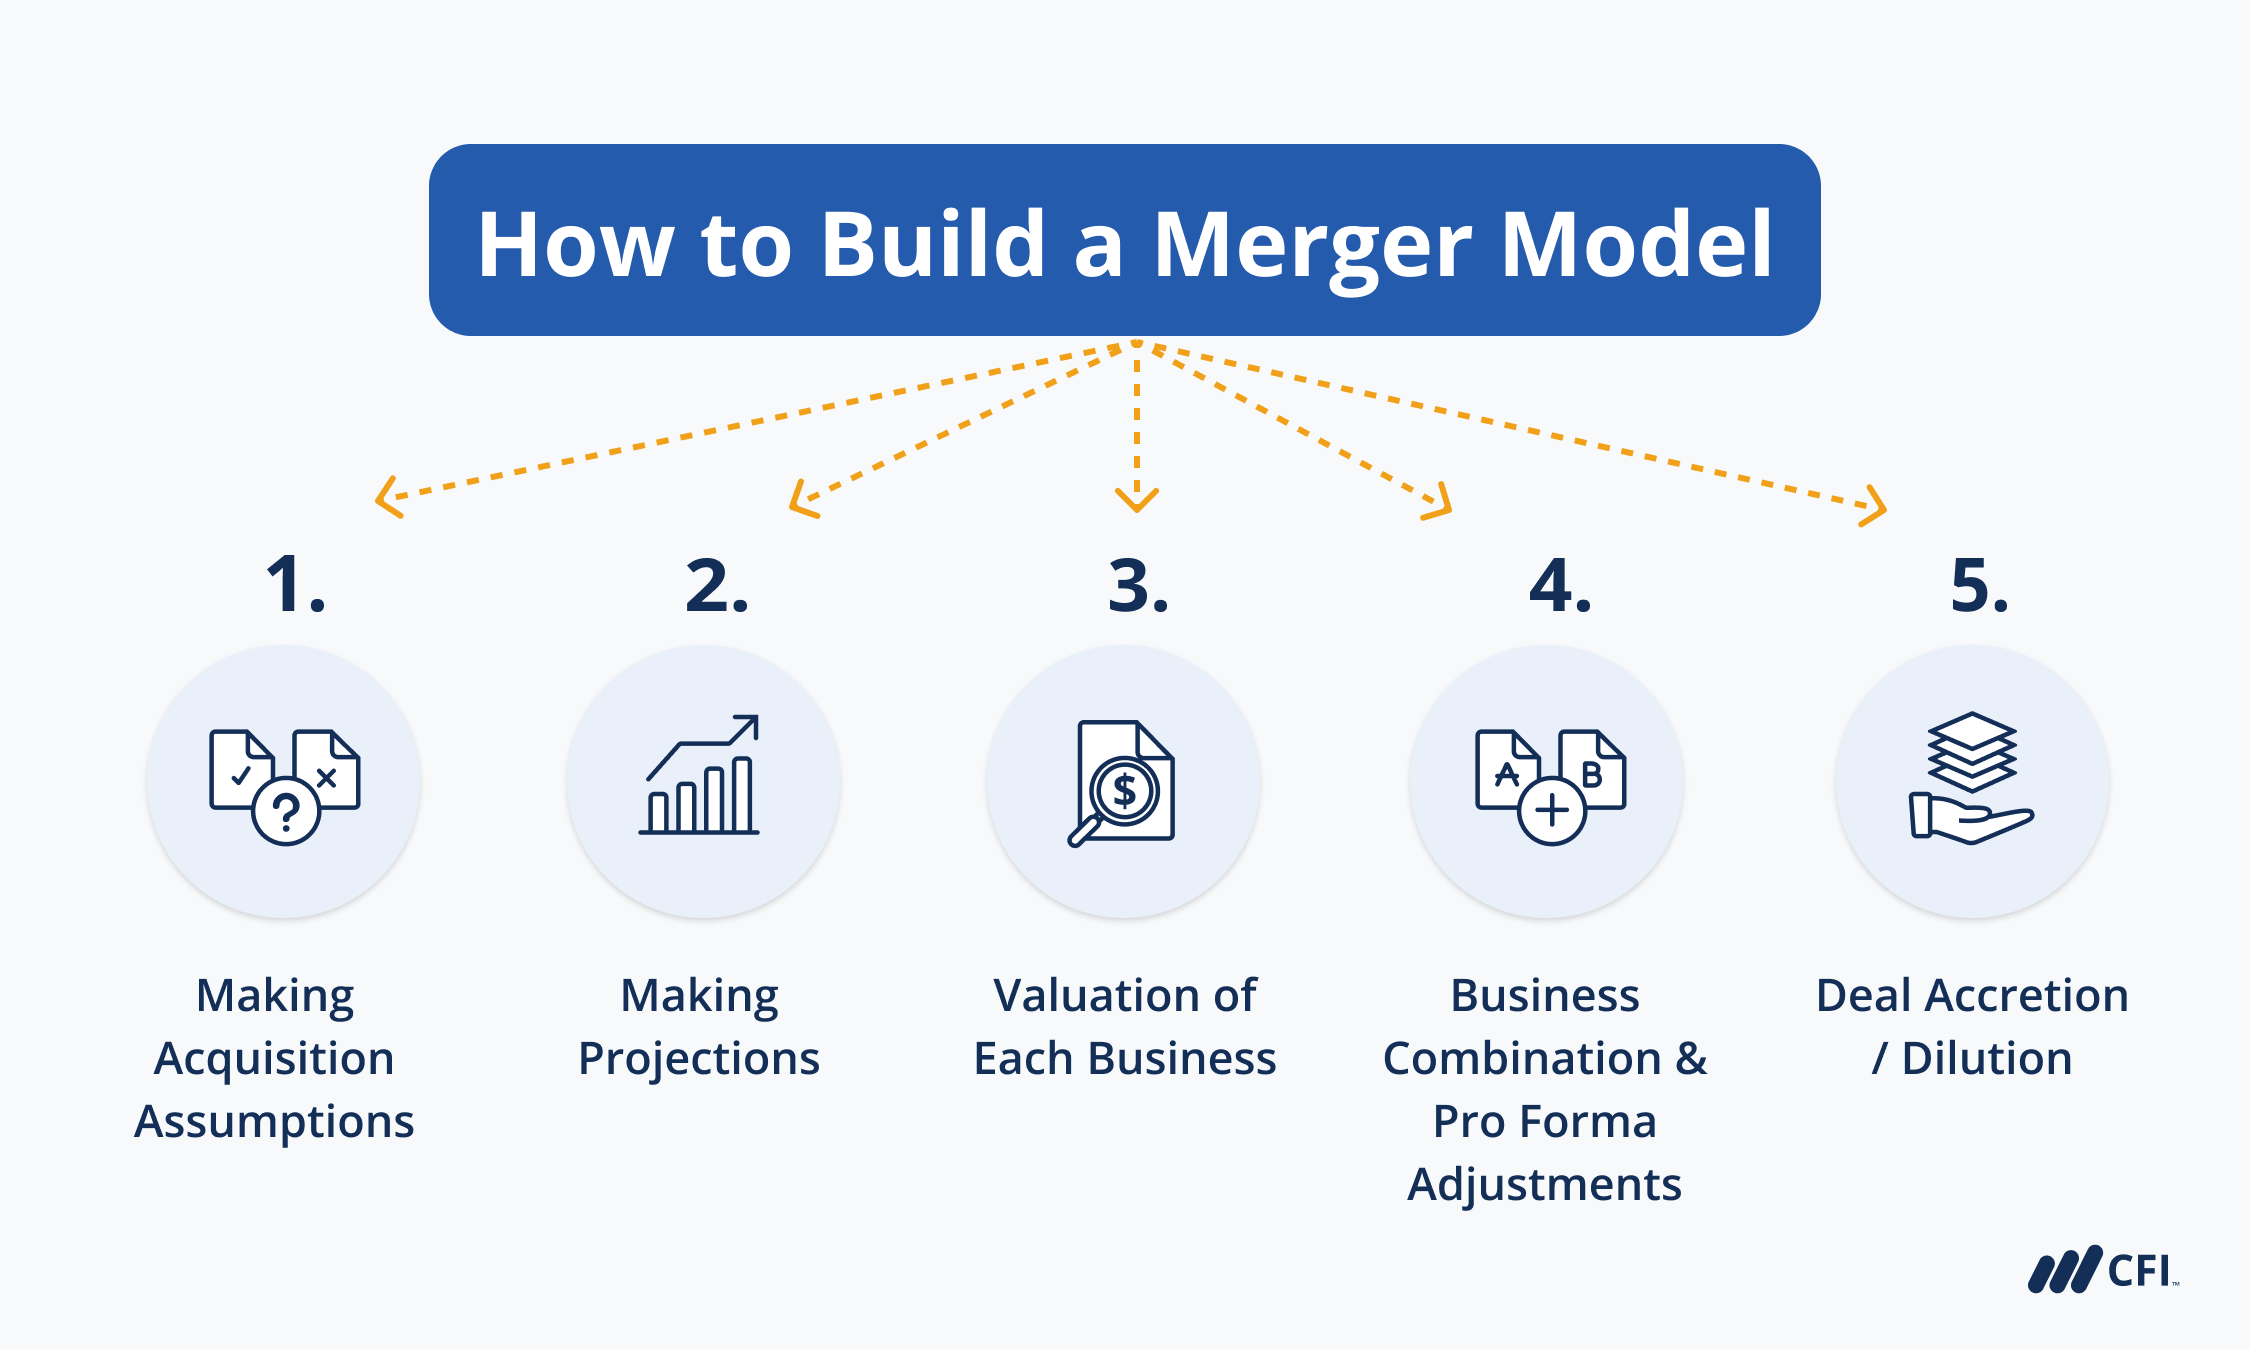 merger and acquisition case study framework